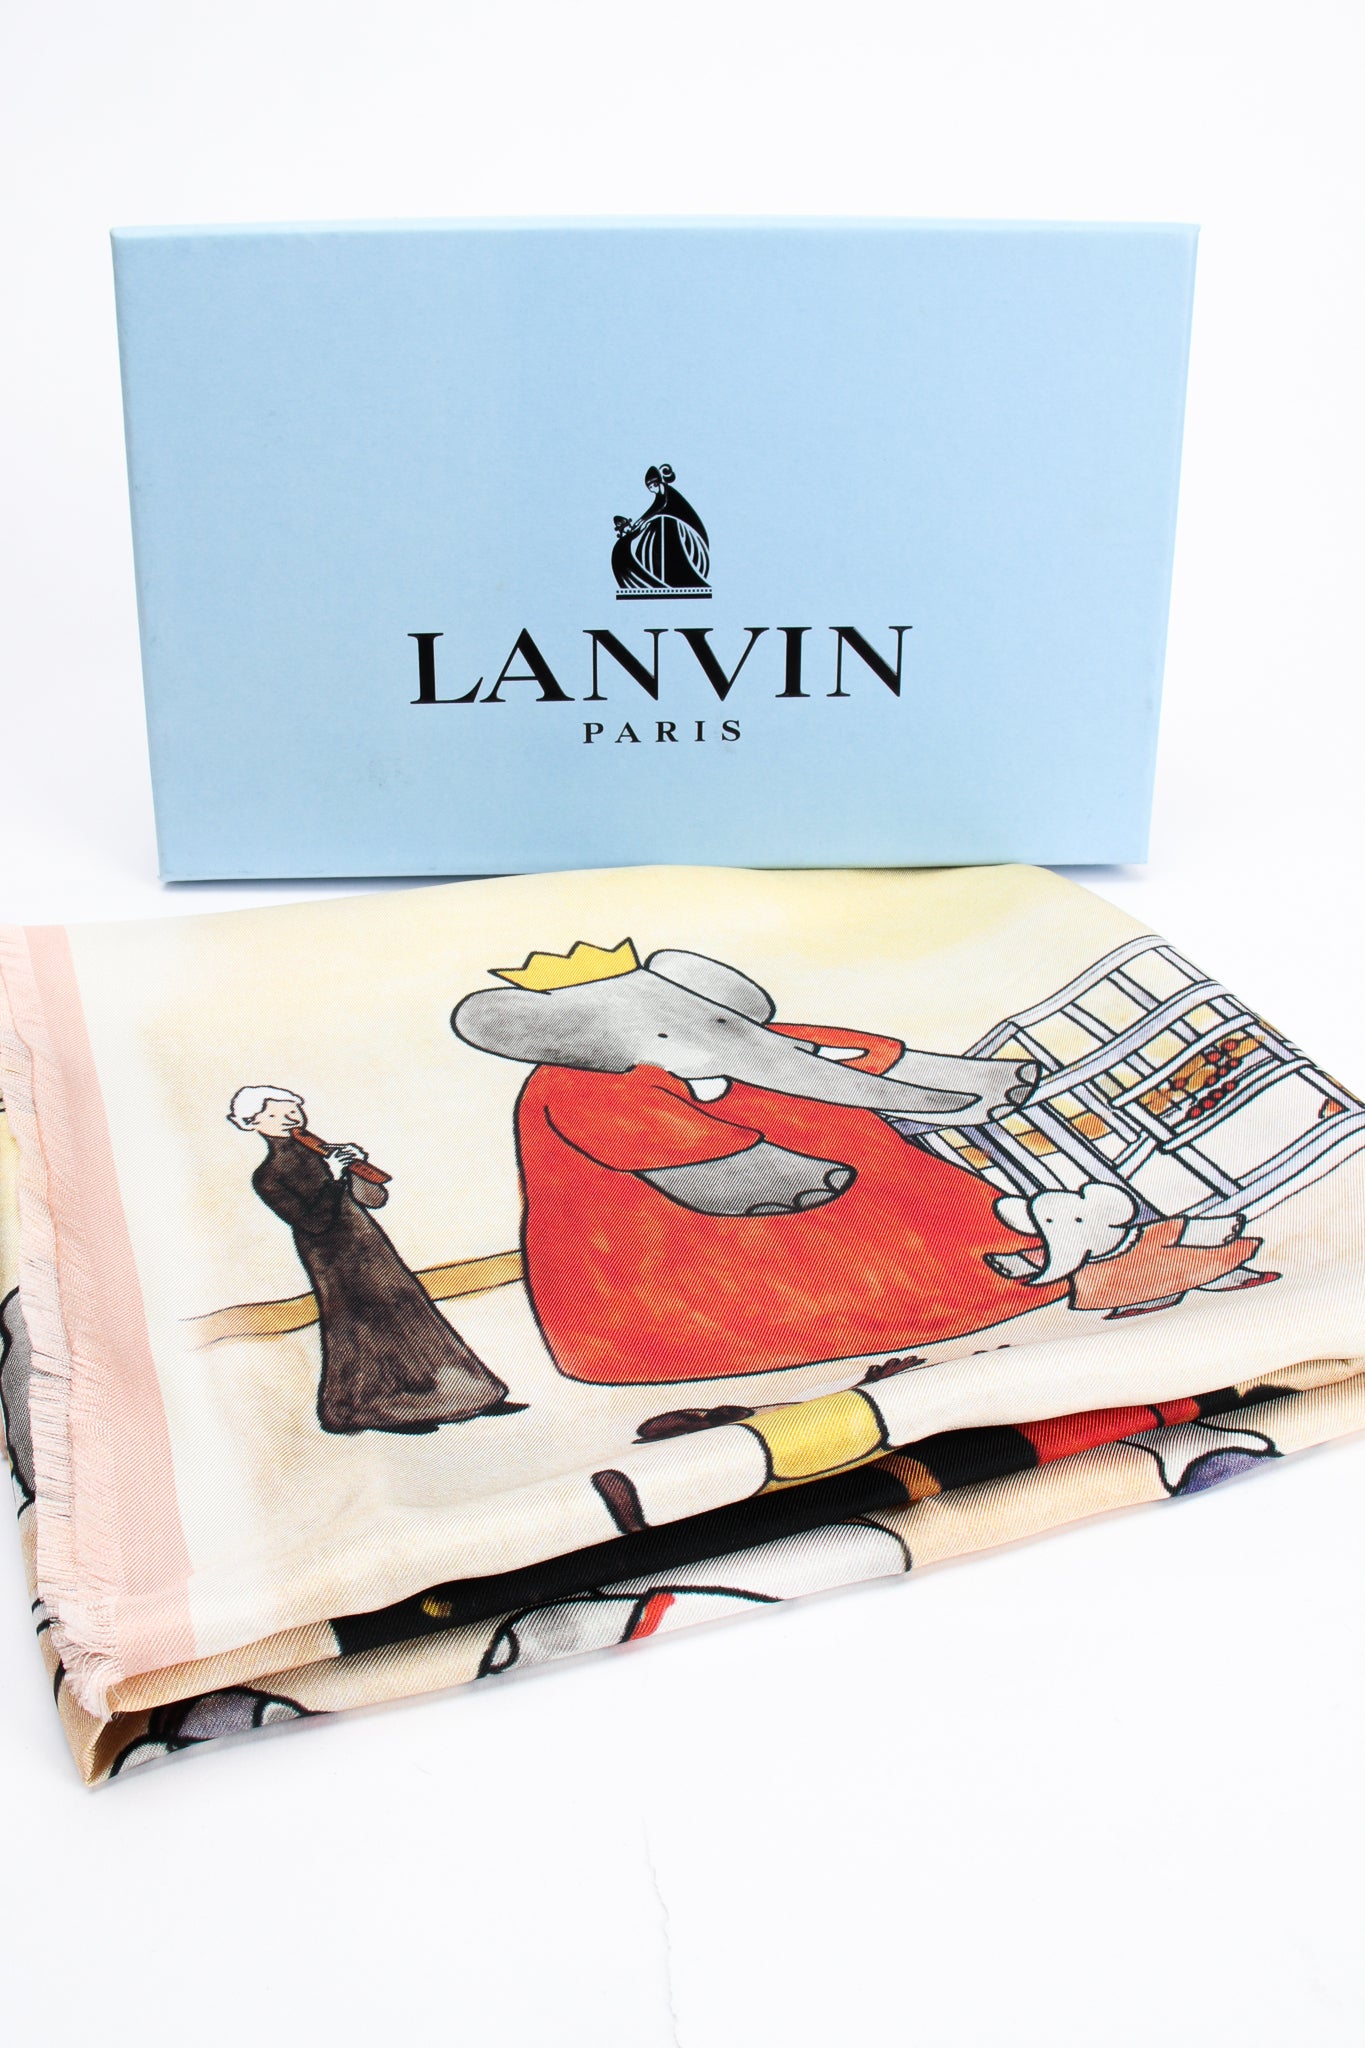 Lanvin Collaboration Babar the Elephant AW 2019 Family Print Silk Scarf with Box at Recess LA